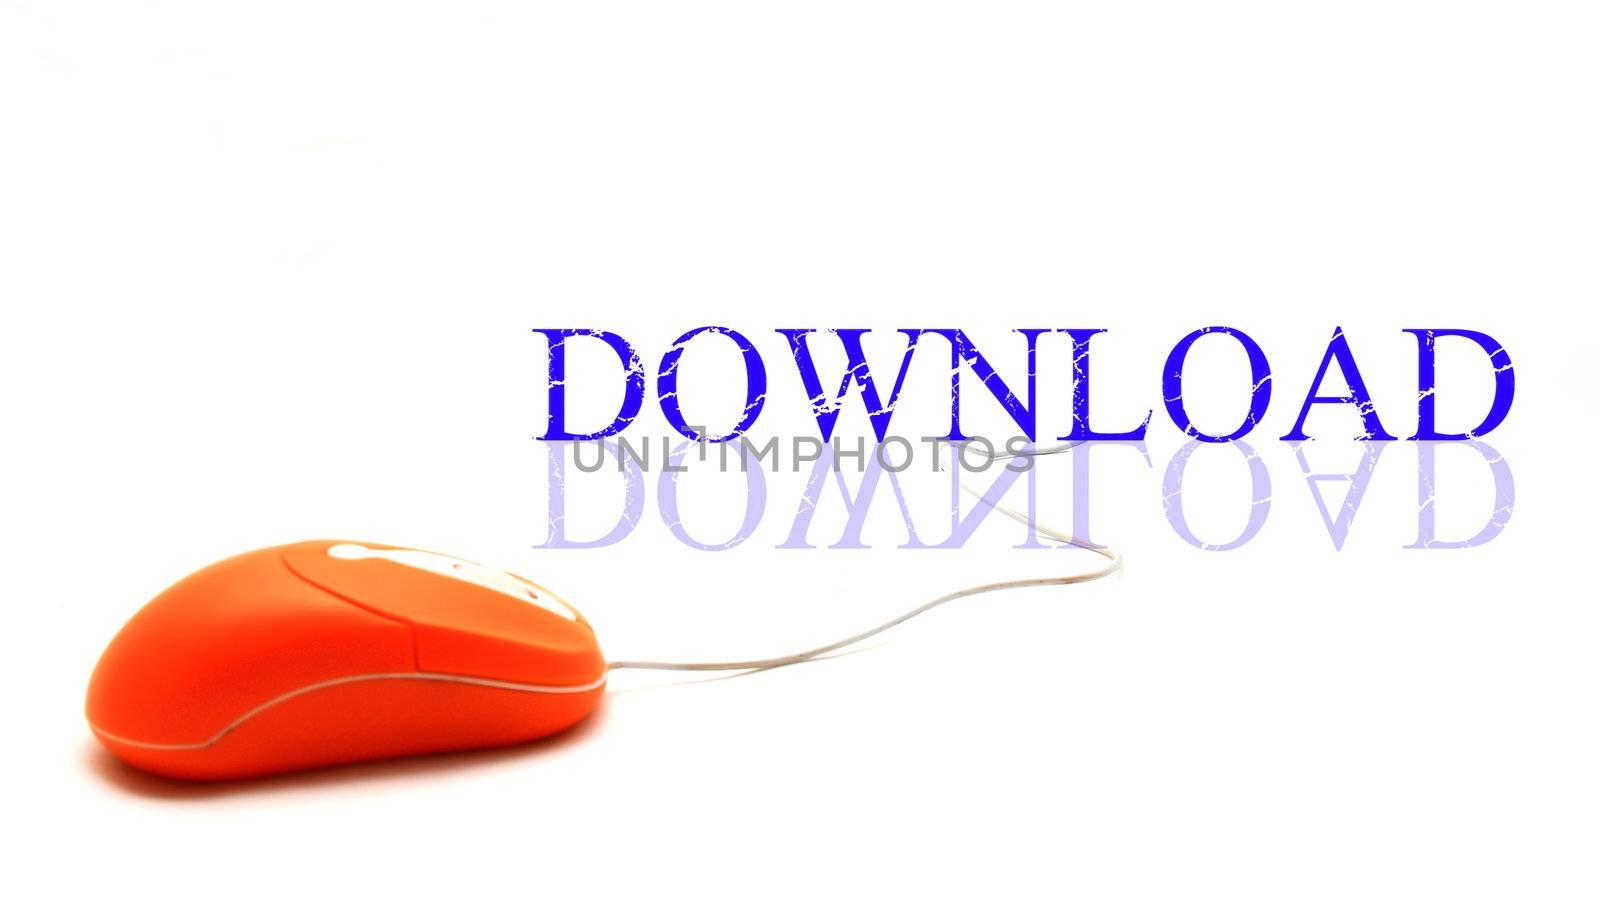 Download word connected with pc mouse by rufous